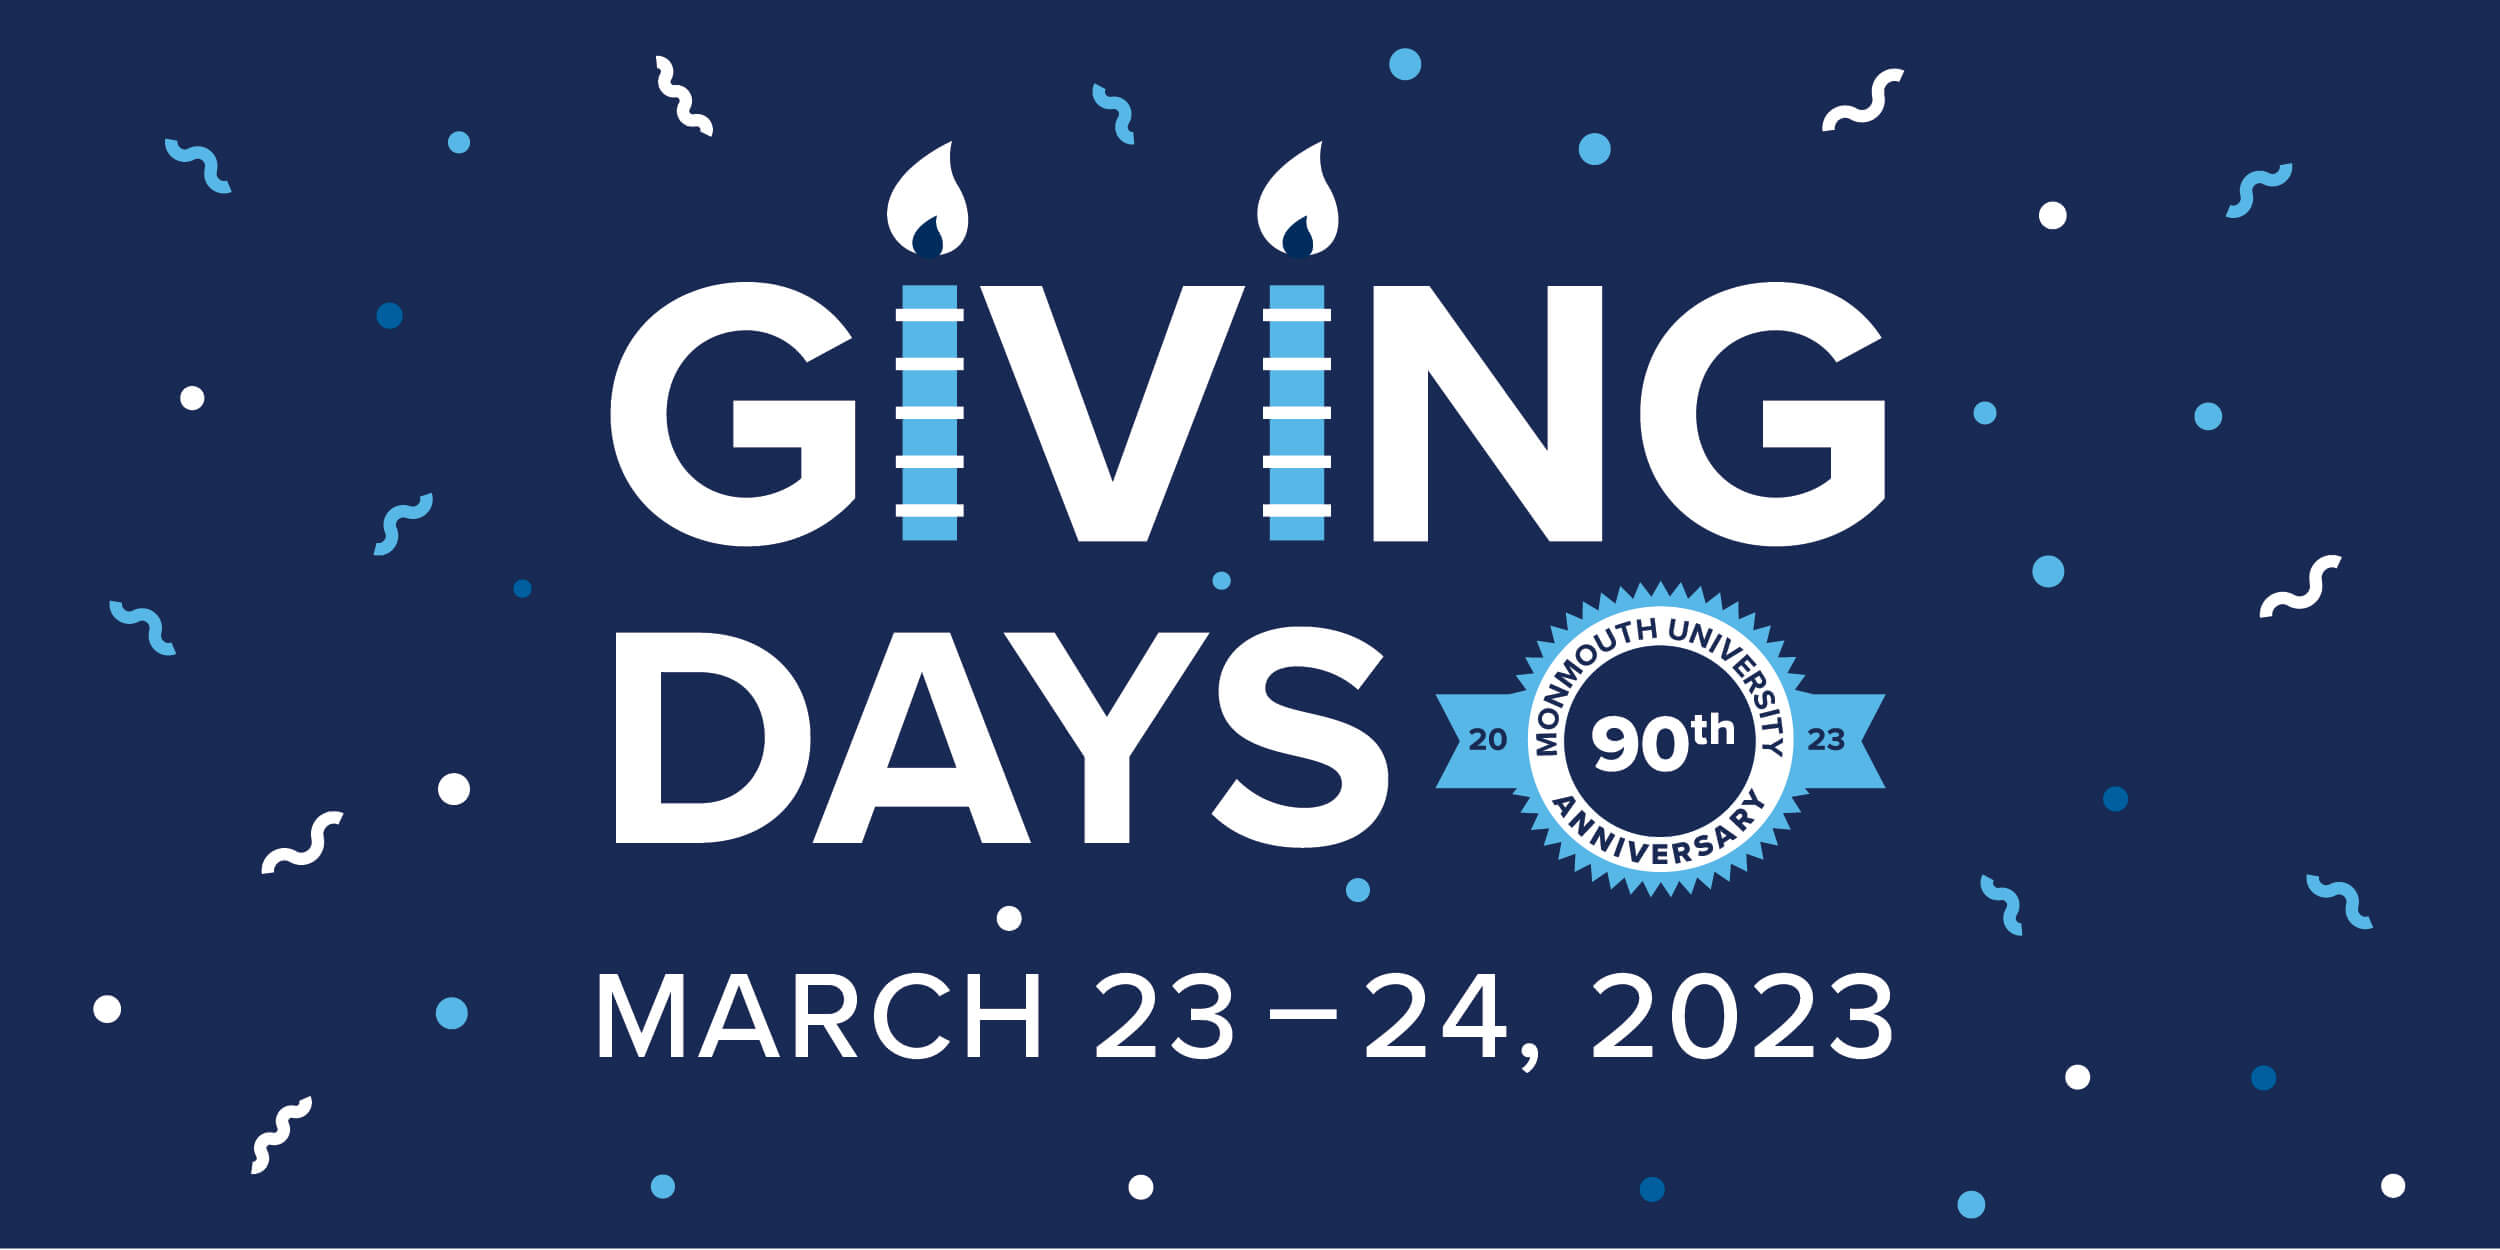 Stylized design of text "Giving Days" "March 23-24 2023"